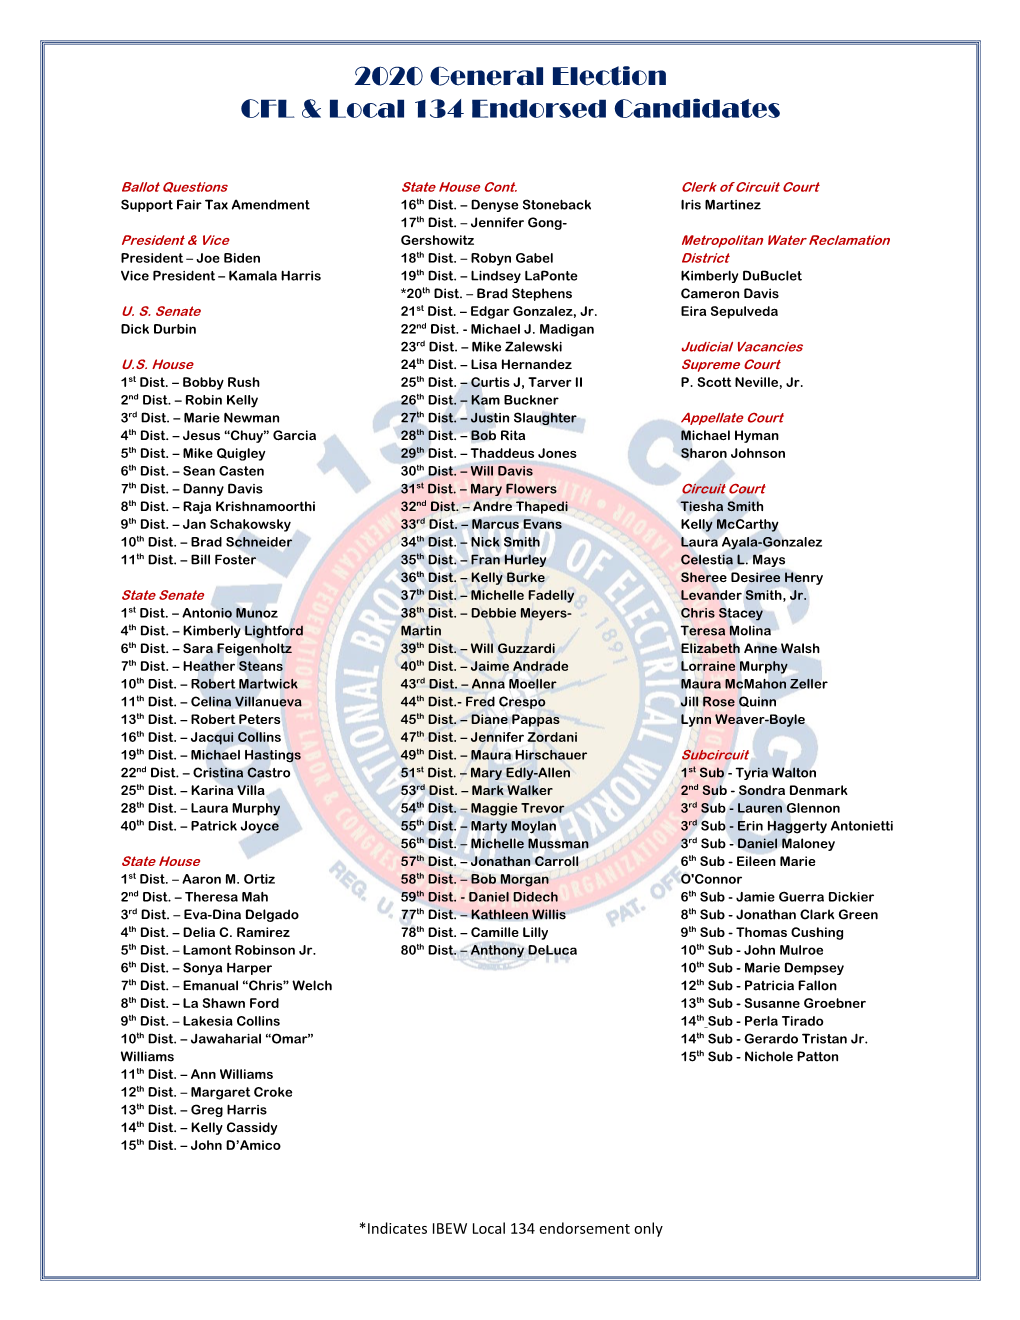 2020 General Election CFL & Local 134 Endorsed Candidates